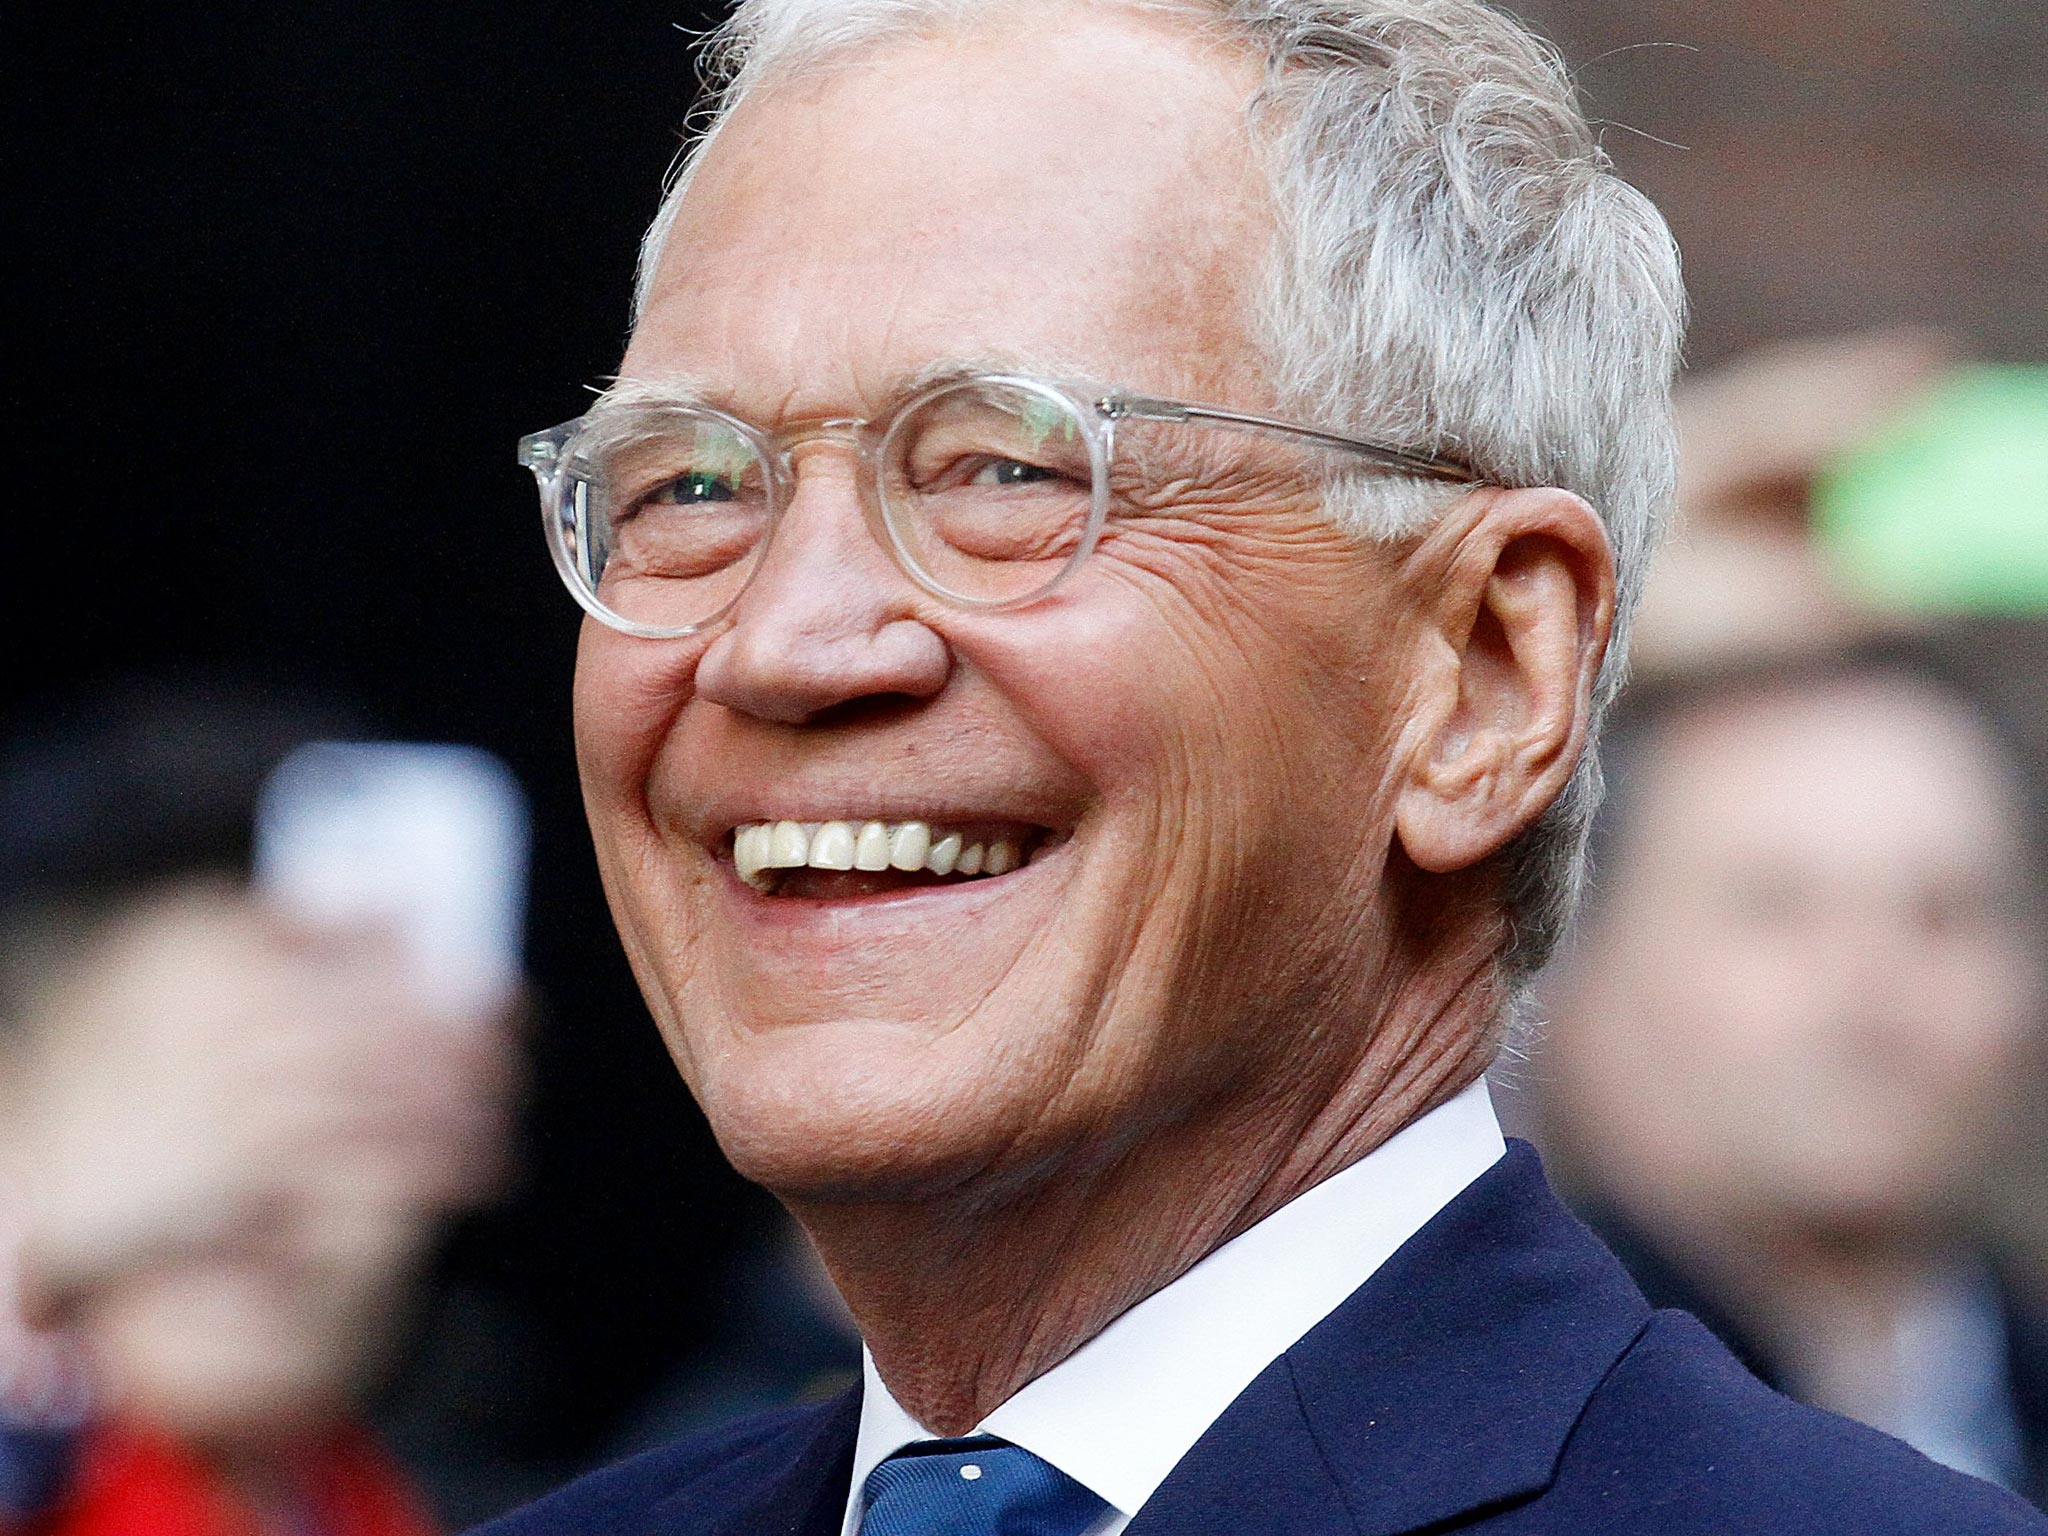 David Letterman will be bowing out of his late night talk show next year